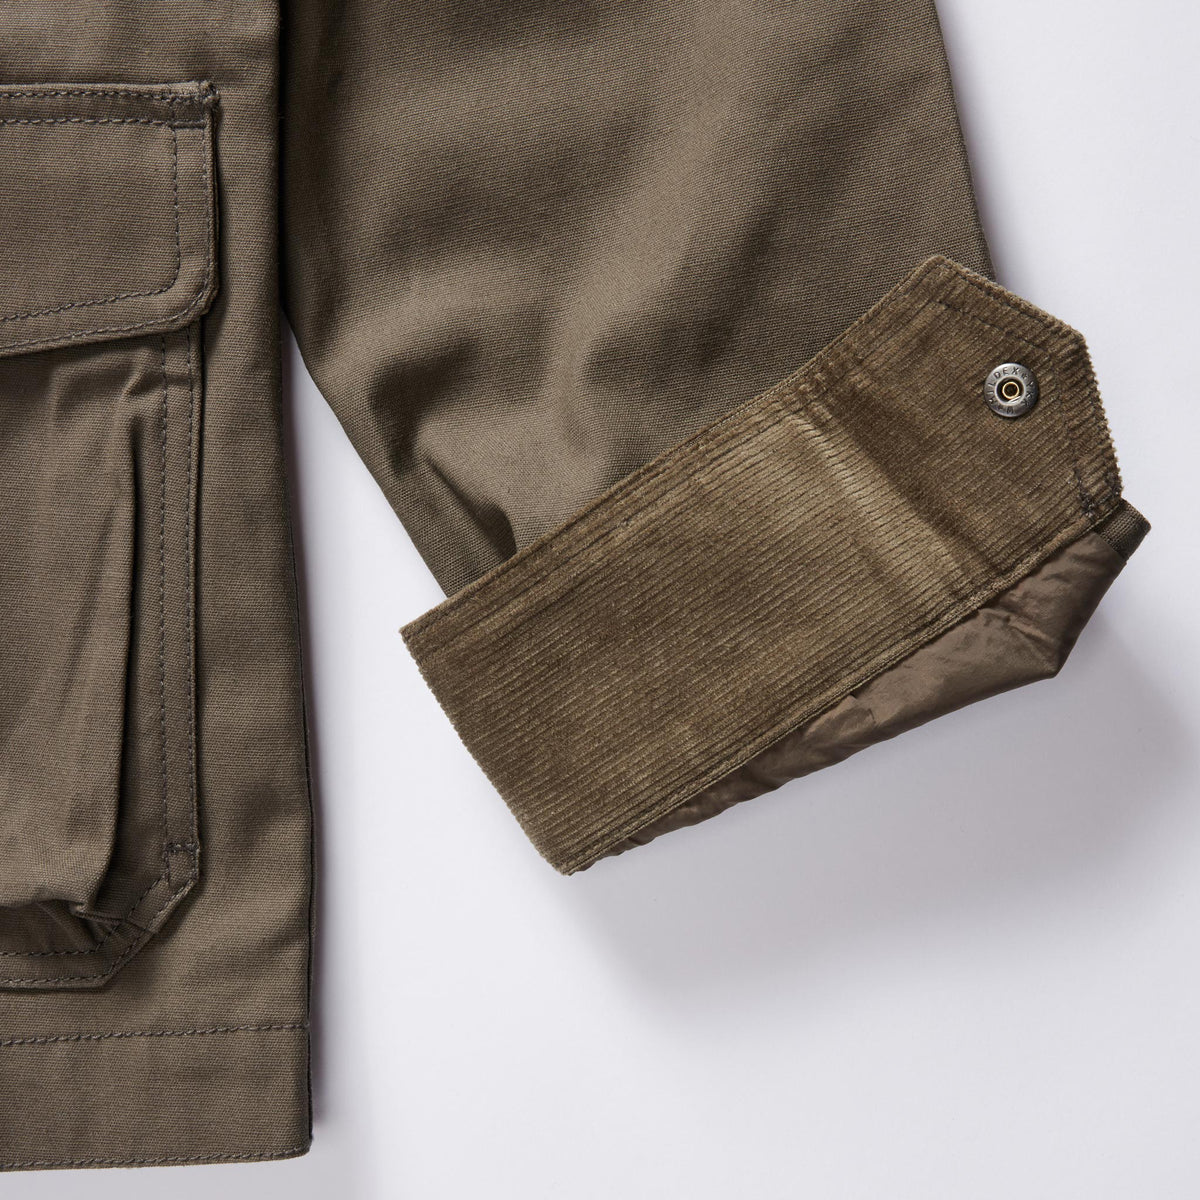 The Pathfinder Jacket Fatigue Olive Dry Wax